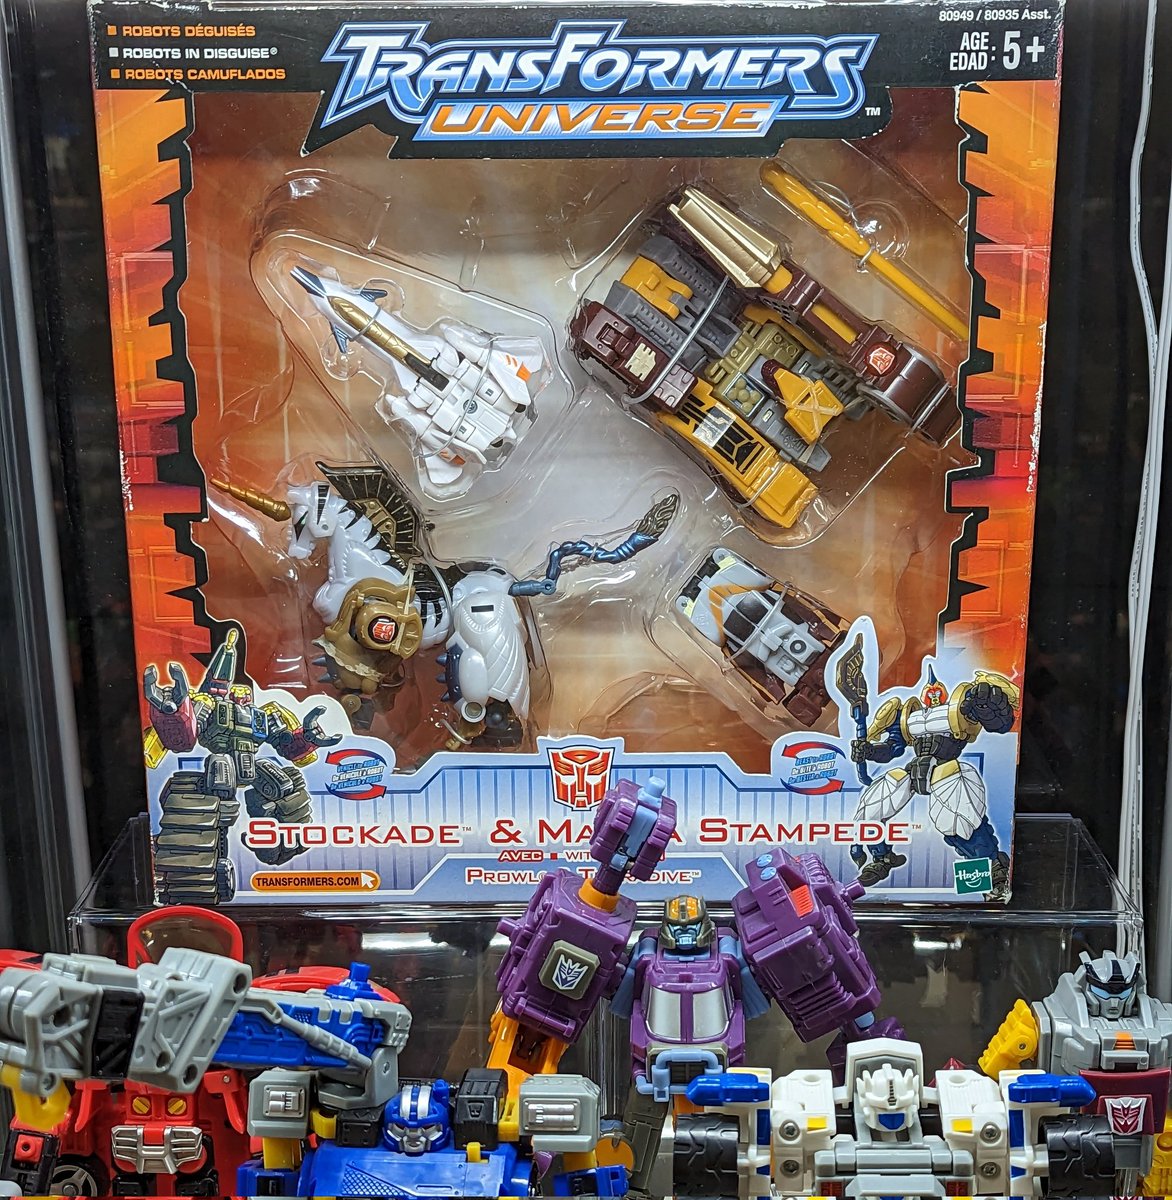 I don't want to talk about how much this was, BUT with the addition of this set the Universe collection is 2 away from being complete! #Transformers #transformersuniverse